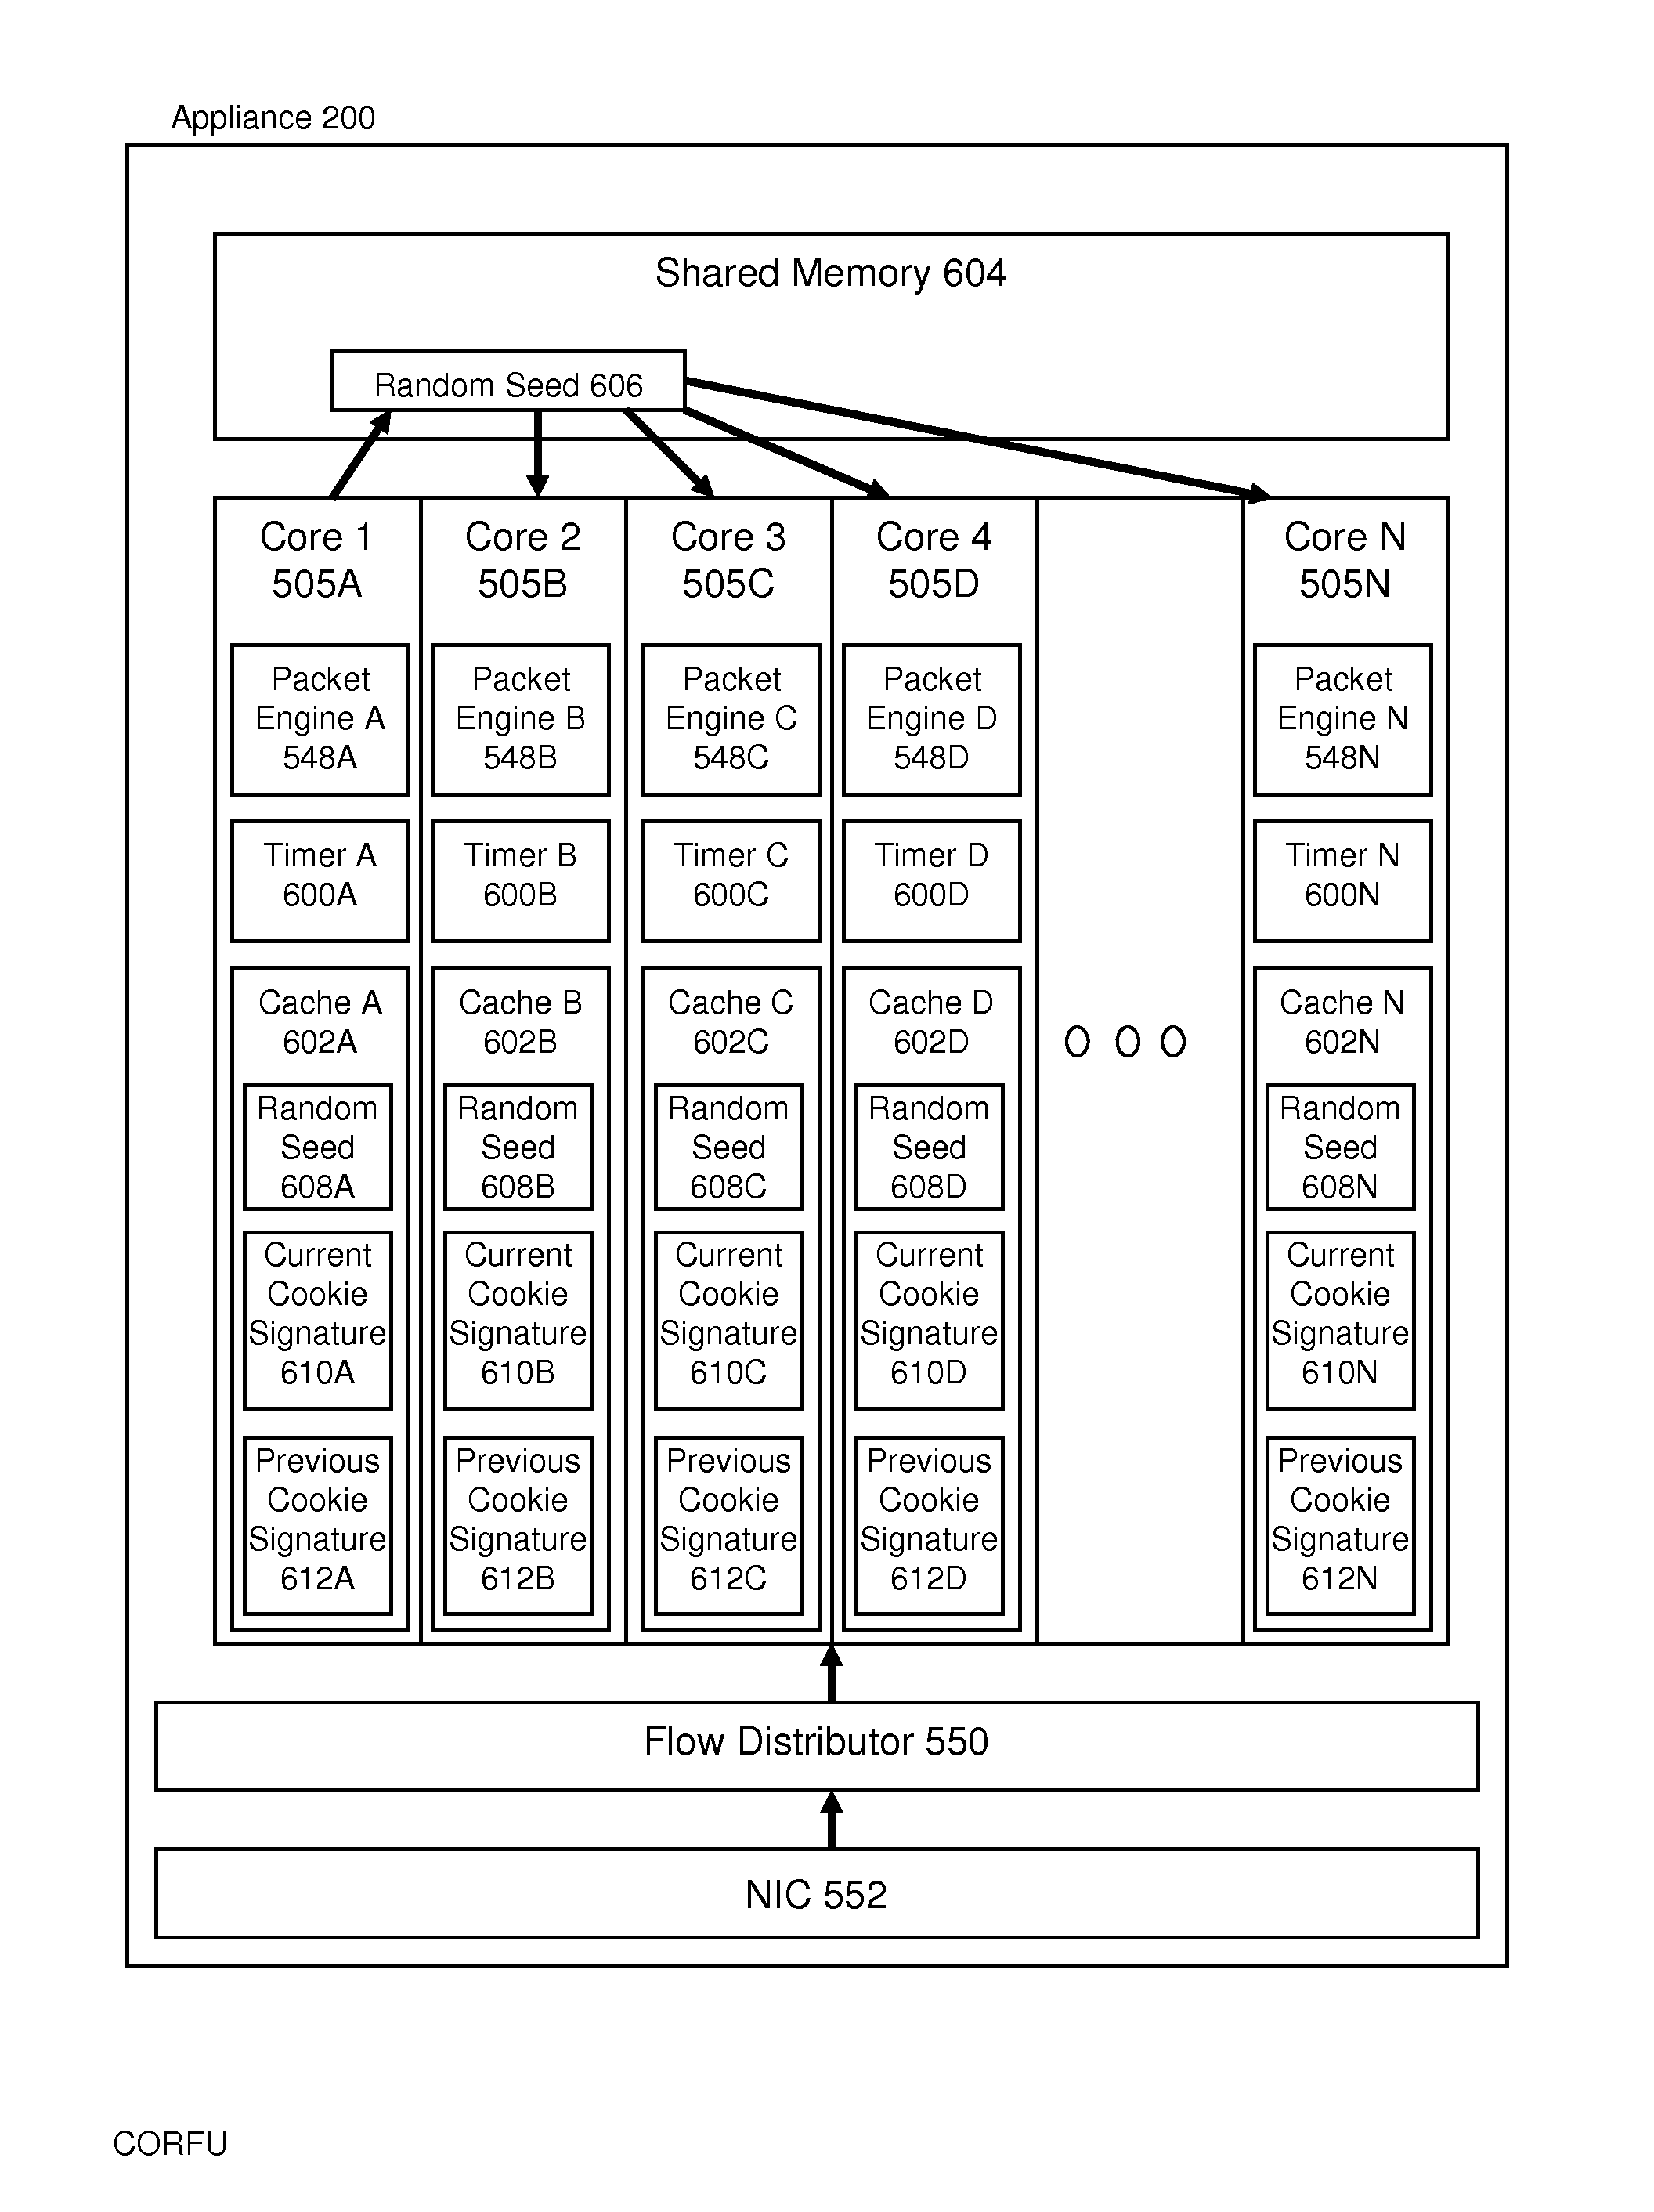 Systems and methods for generating and managing cookie signatures for prevention of HTTP denial of service in multi-core system